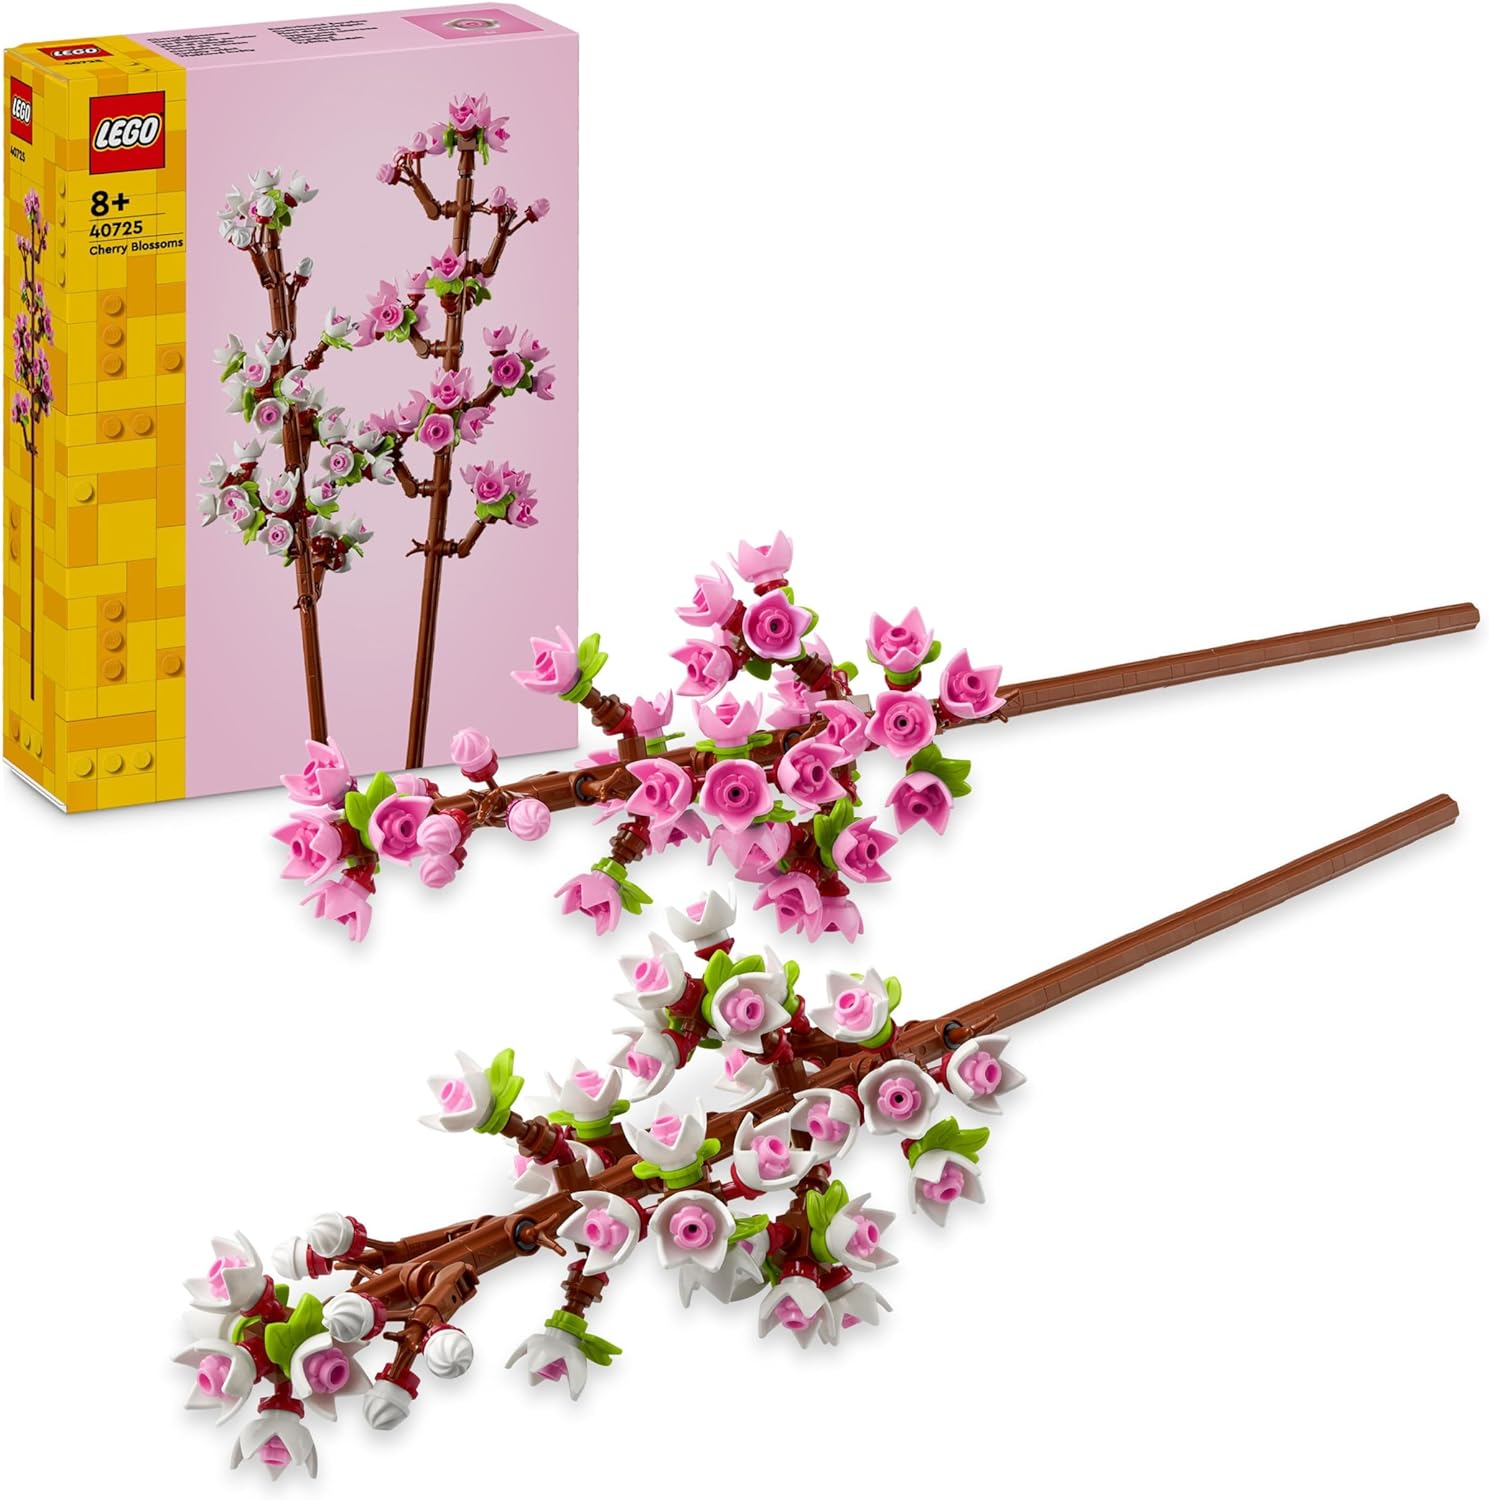 LEGO Creator Cherry Blossoms, Artificial Flowers for Building, Desk or Nursery Decoration for Children, Bouquet for Display, Girls and Boys from 8 Years 40725